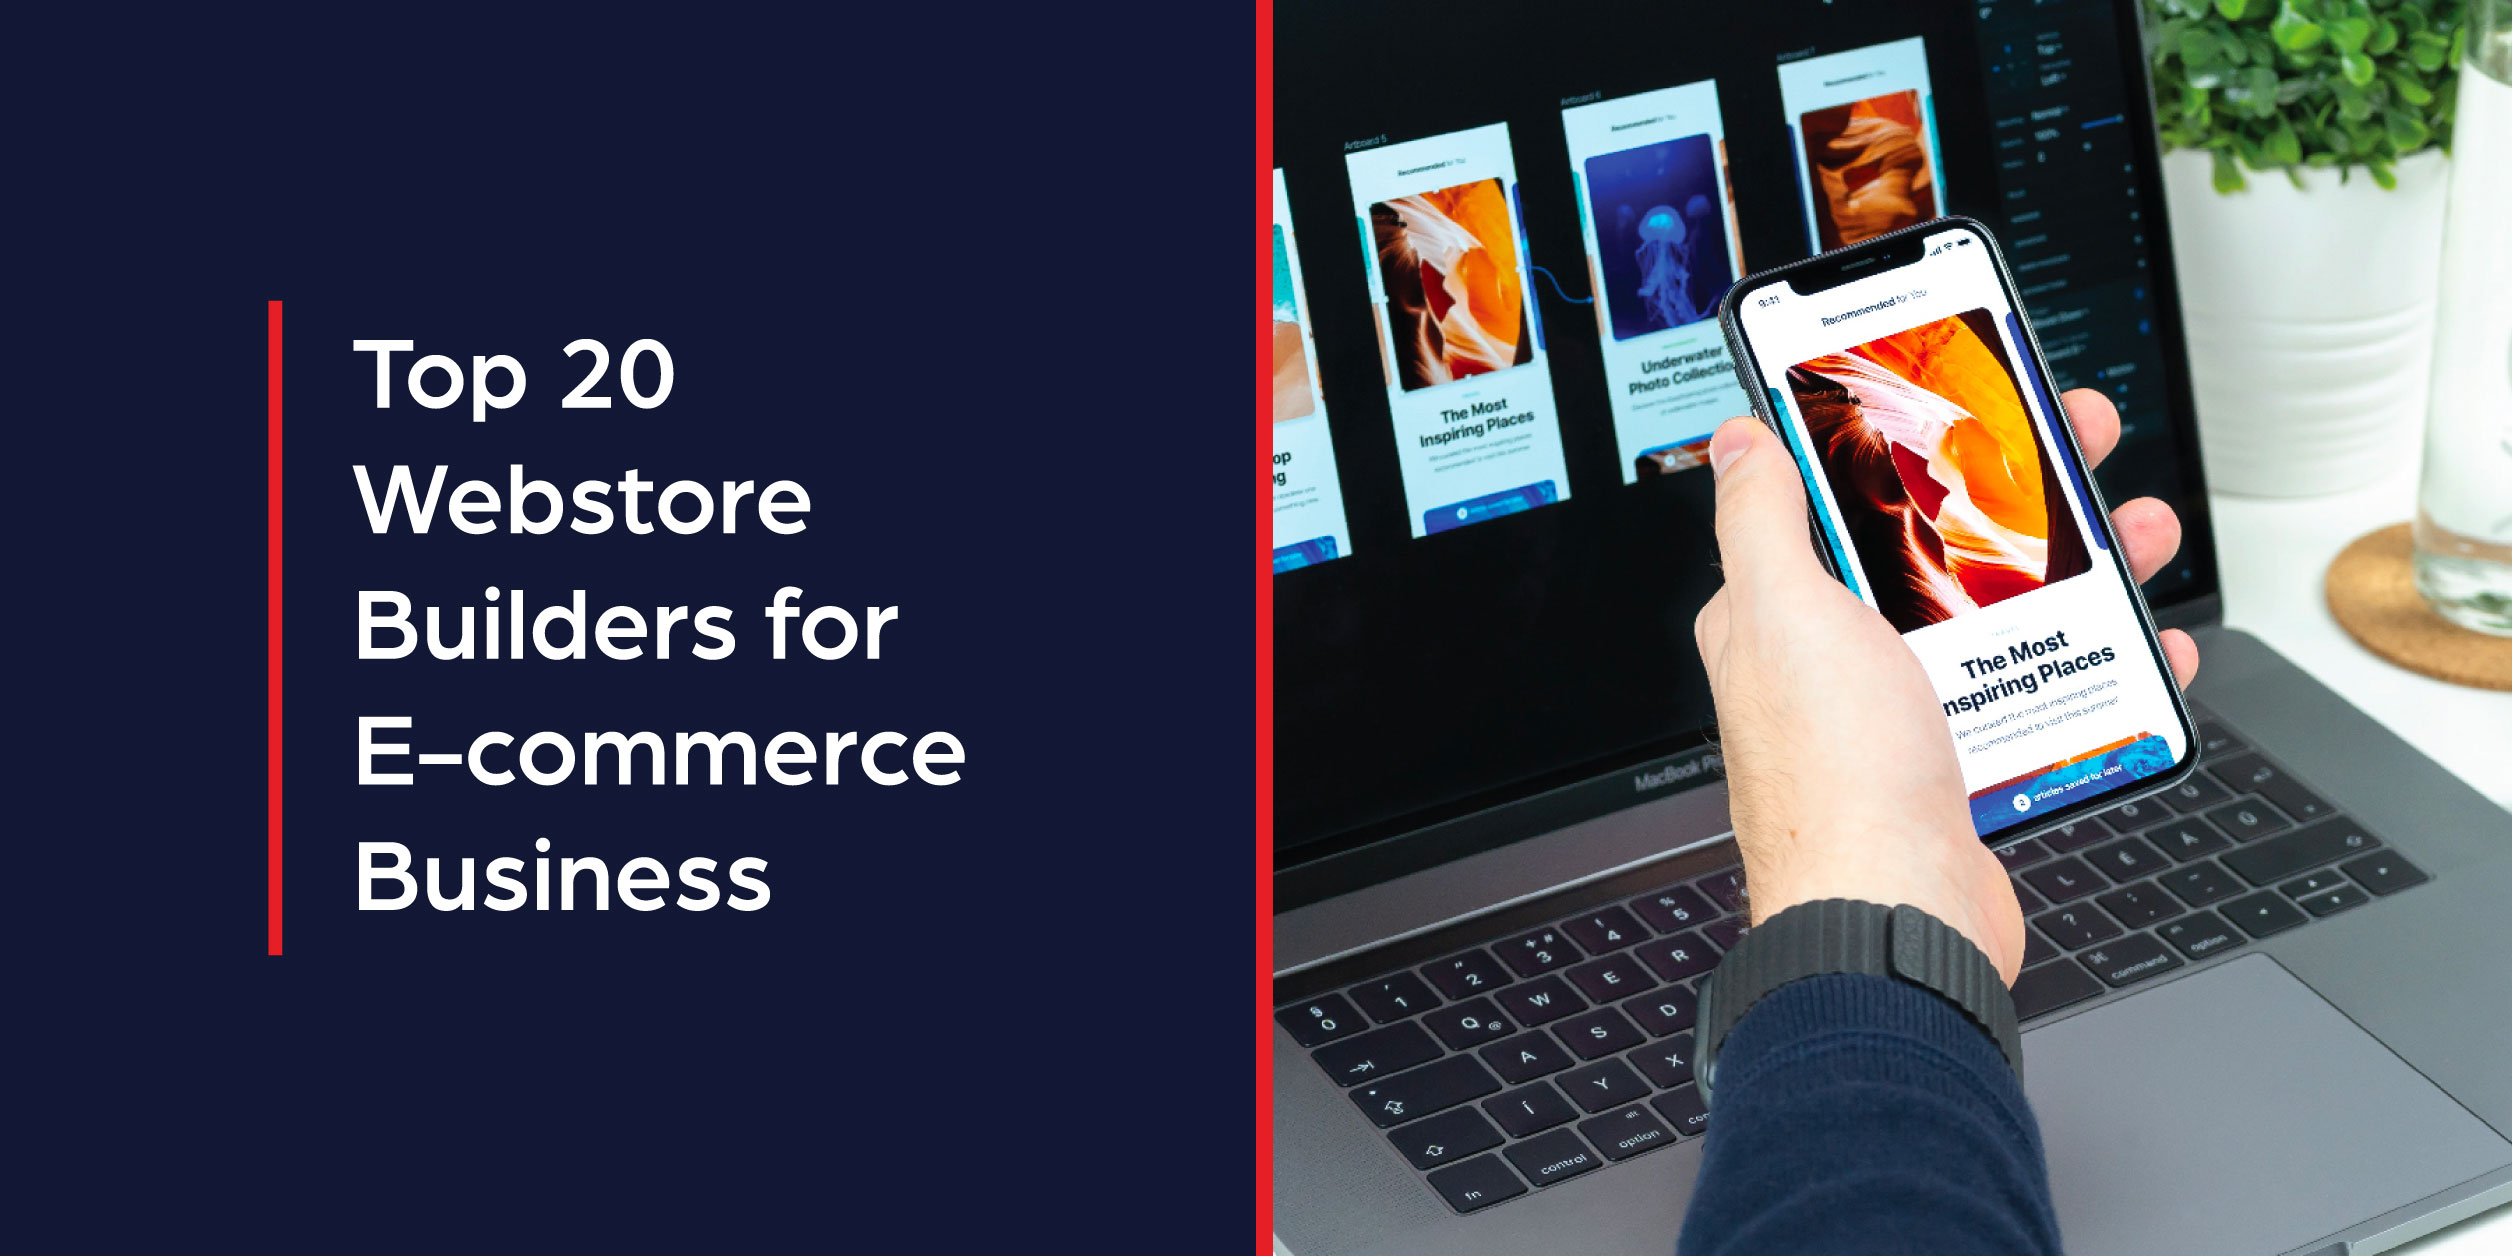 Top 20 Webstore Builders for E-commerce Businesses